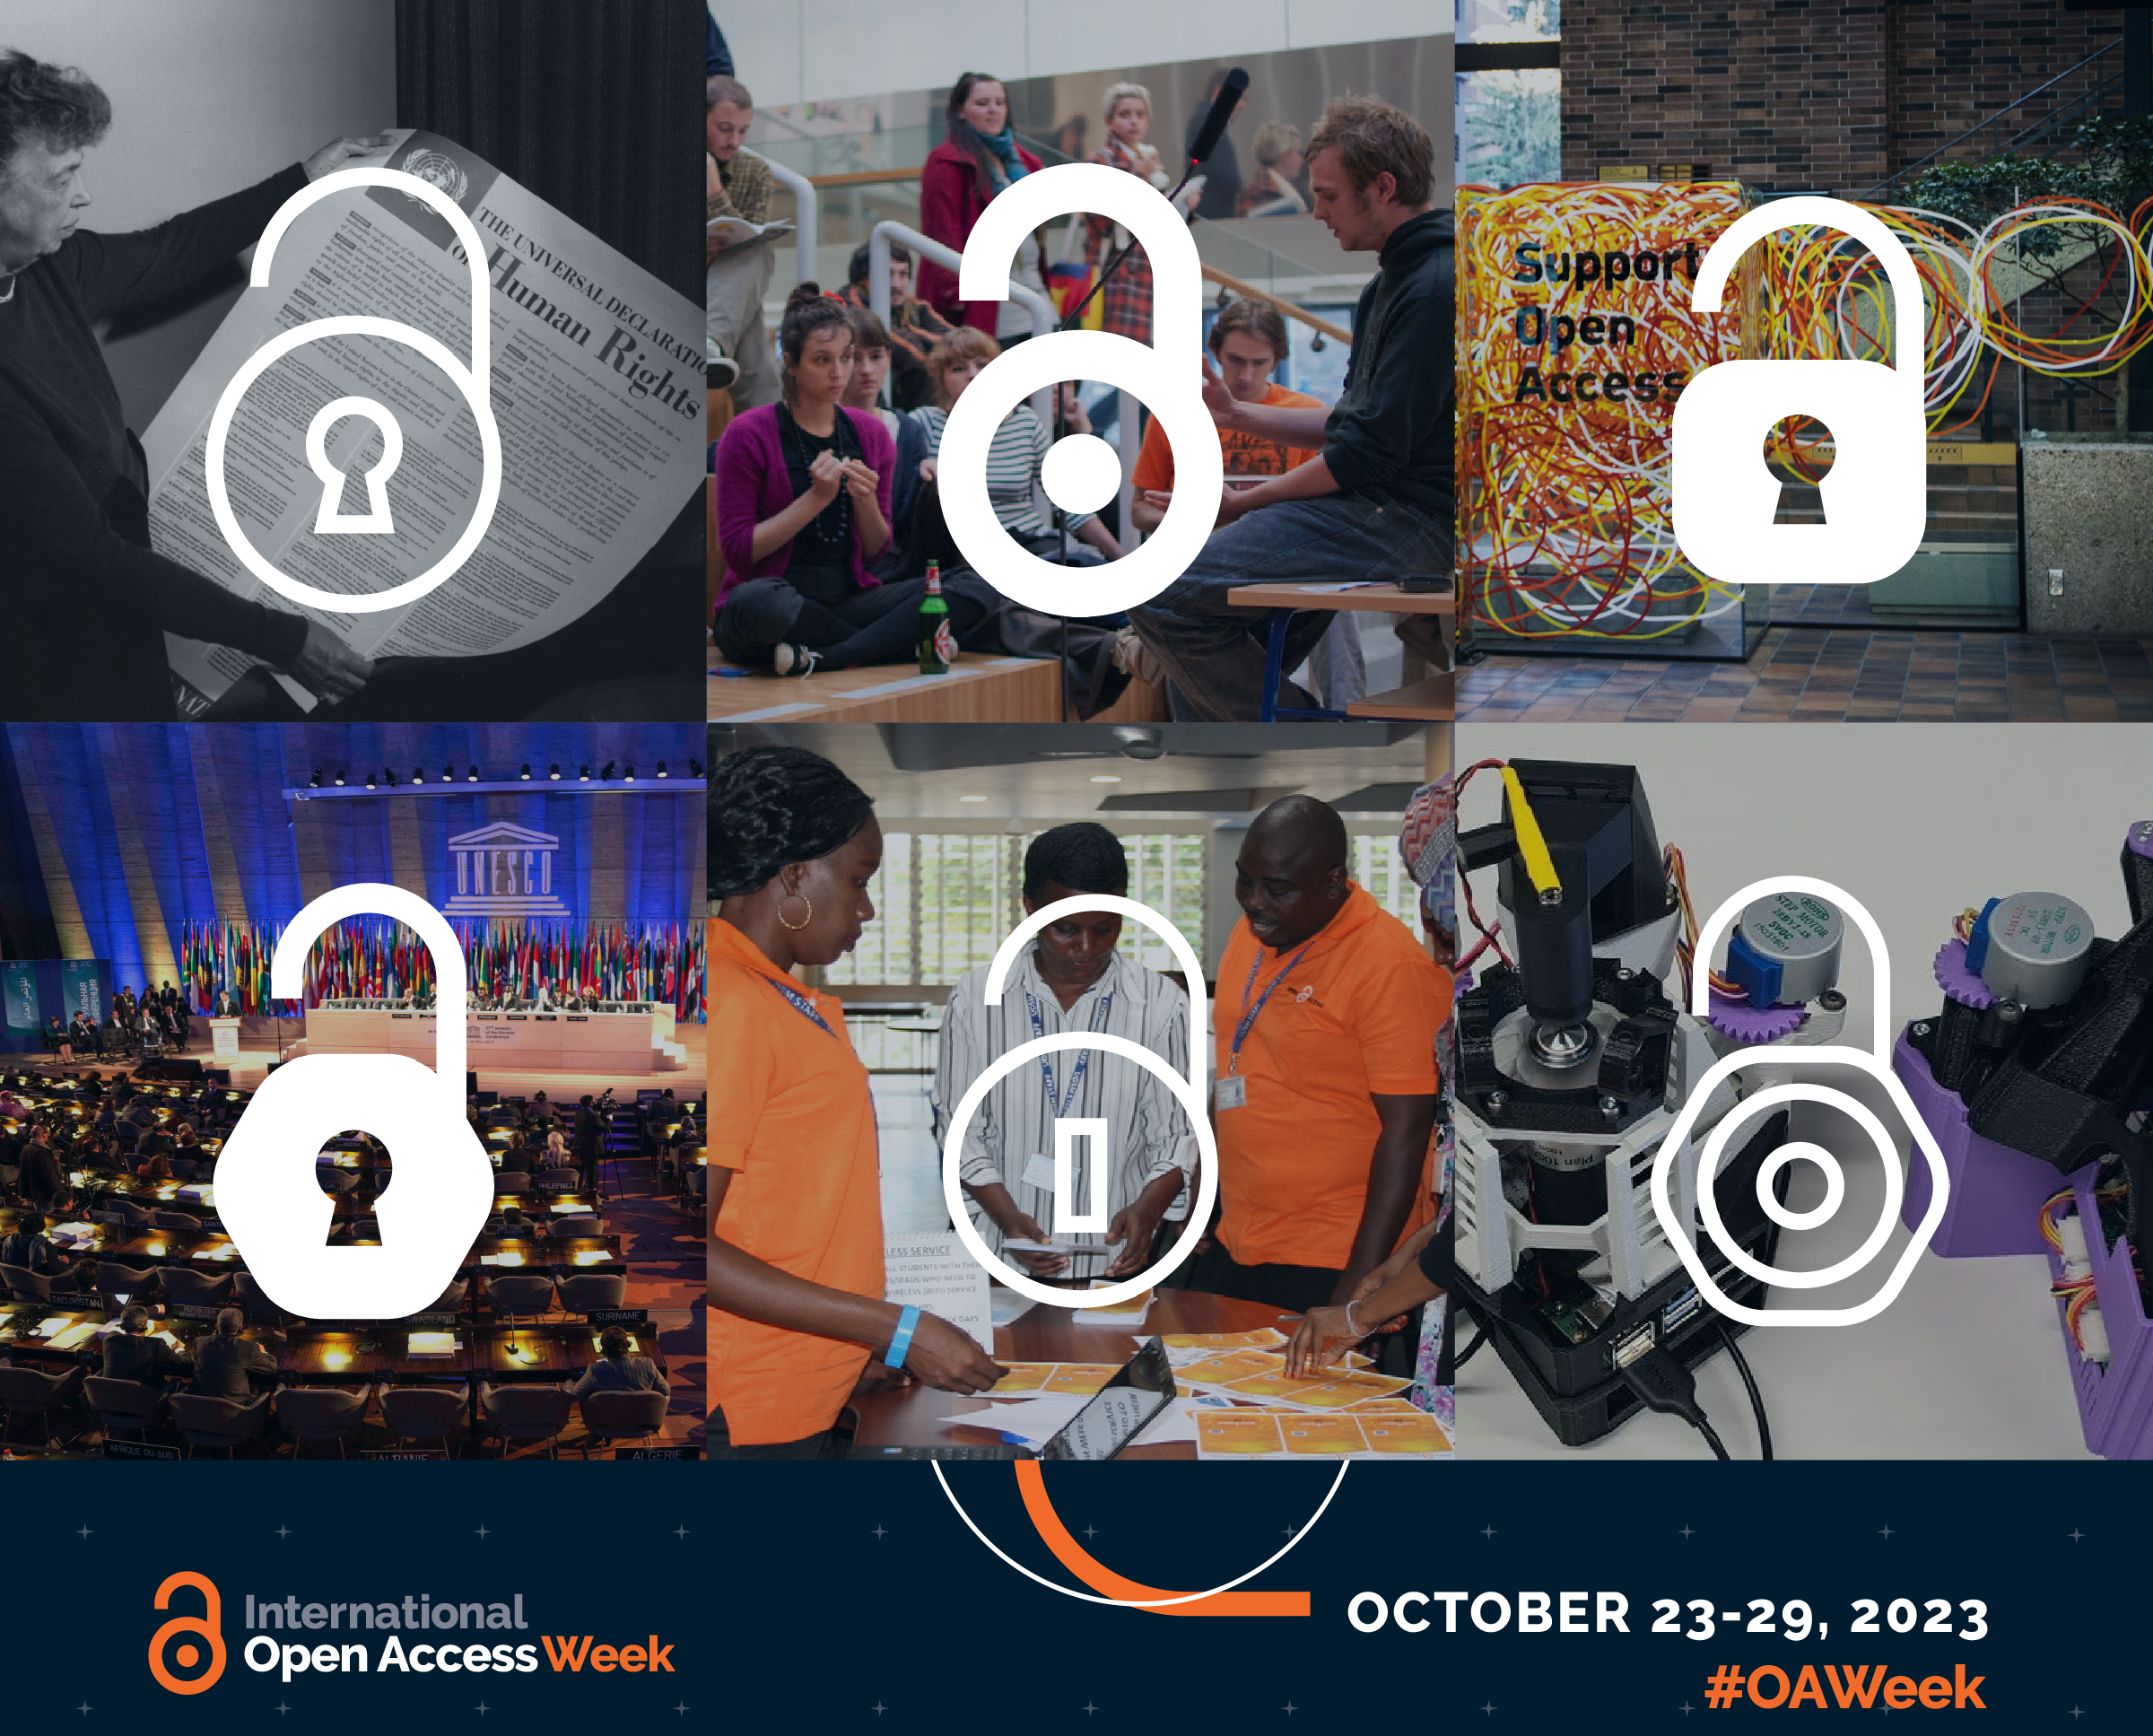 Grid of images showing people in various forms of learning and research. Text on image reads International Open Access Week, October 23-29 2023 #OAWeek